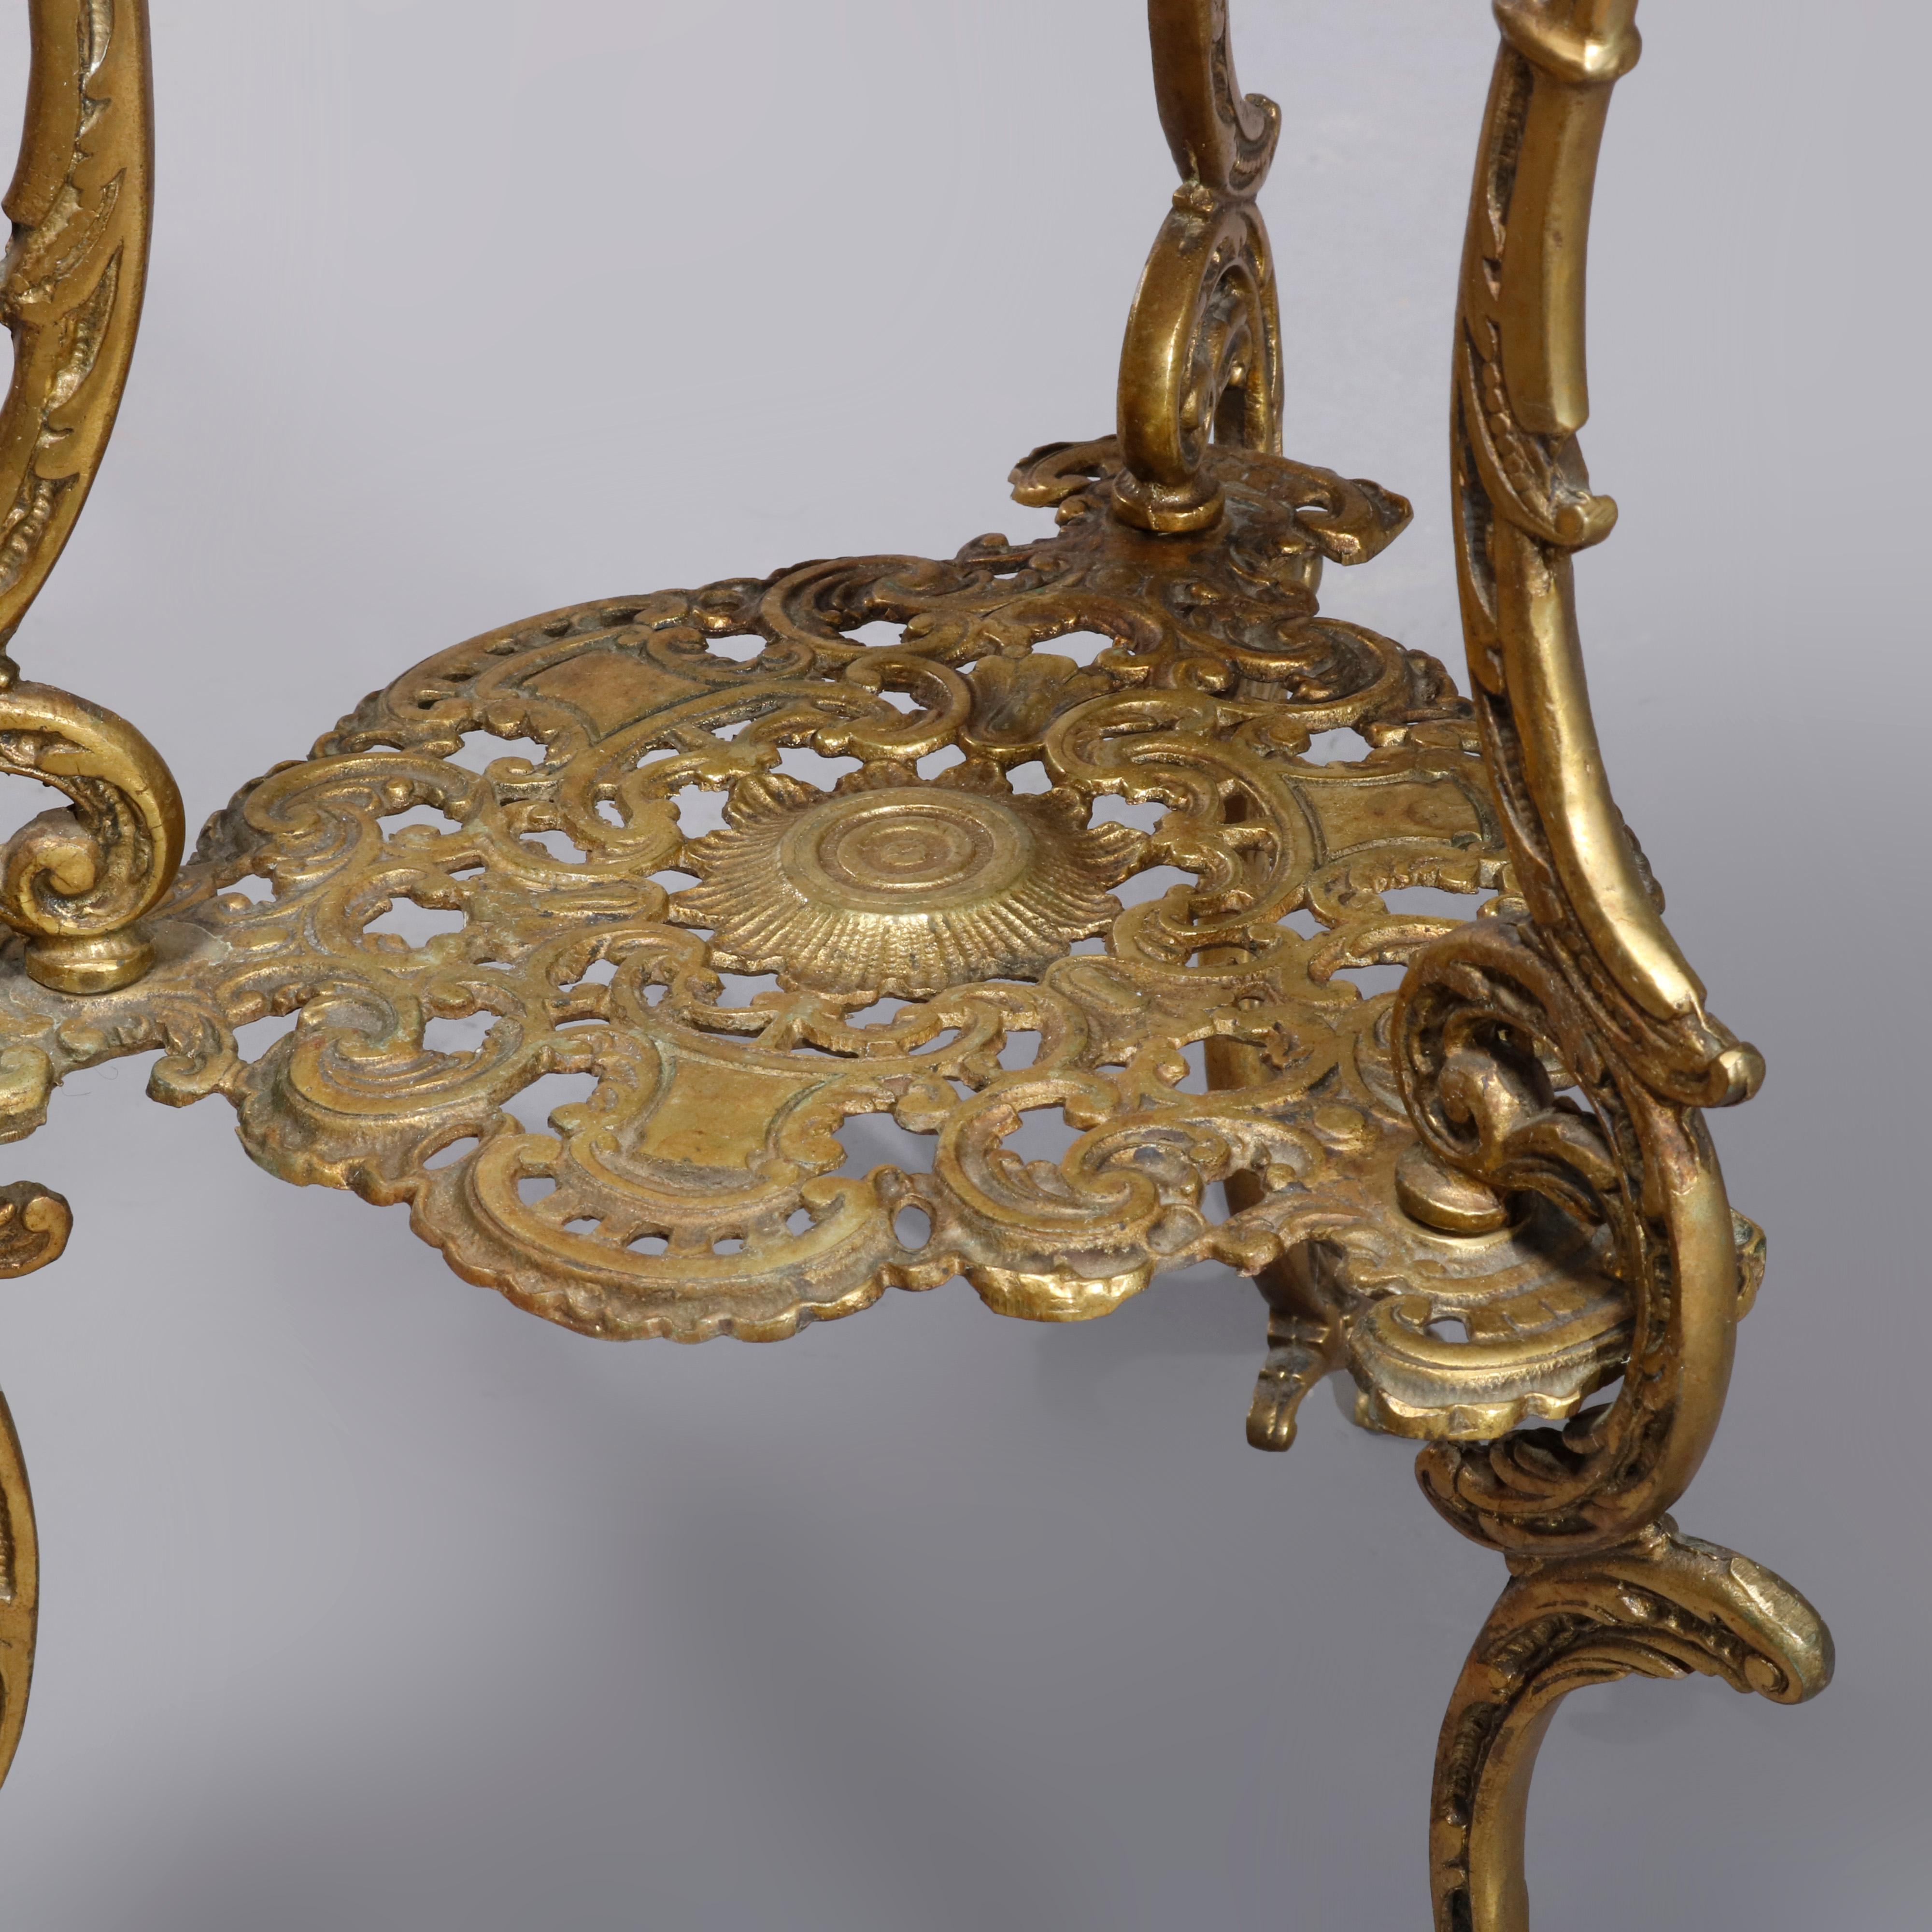 20th Century Antique French Louis XIV Gilt Bronze & Marble Foliate Form Fern Stand circa 1900